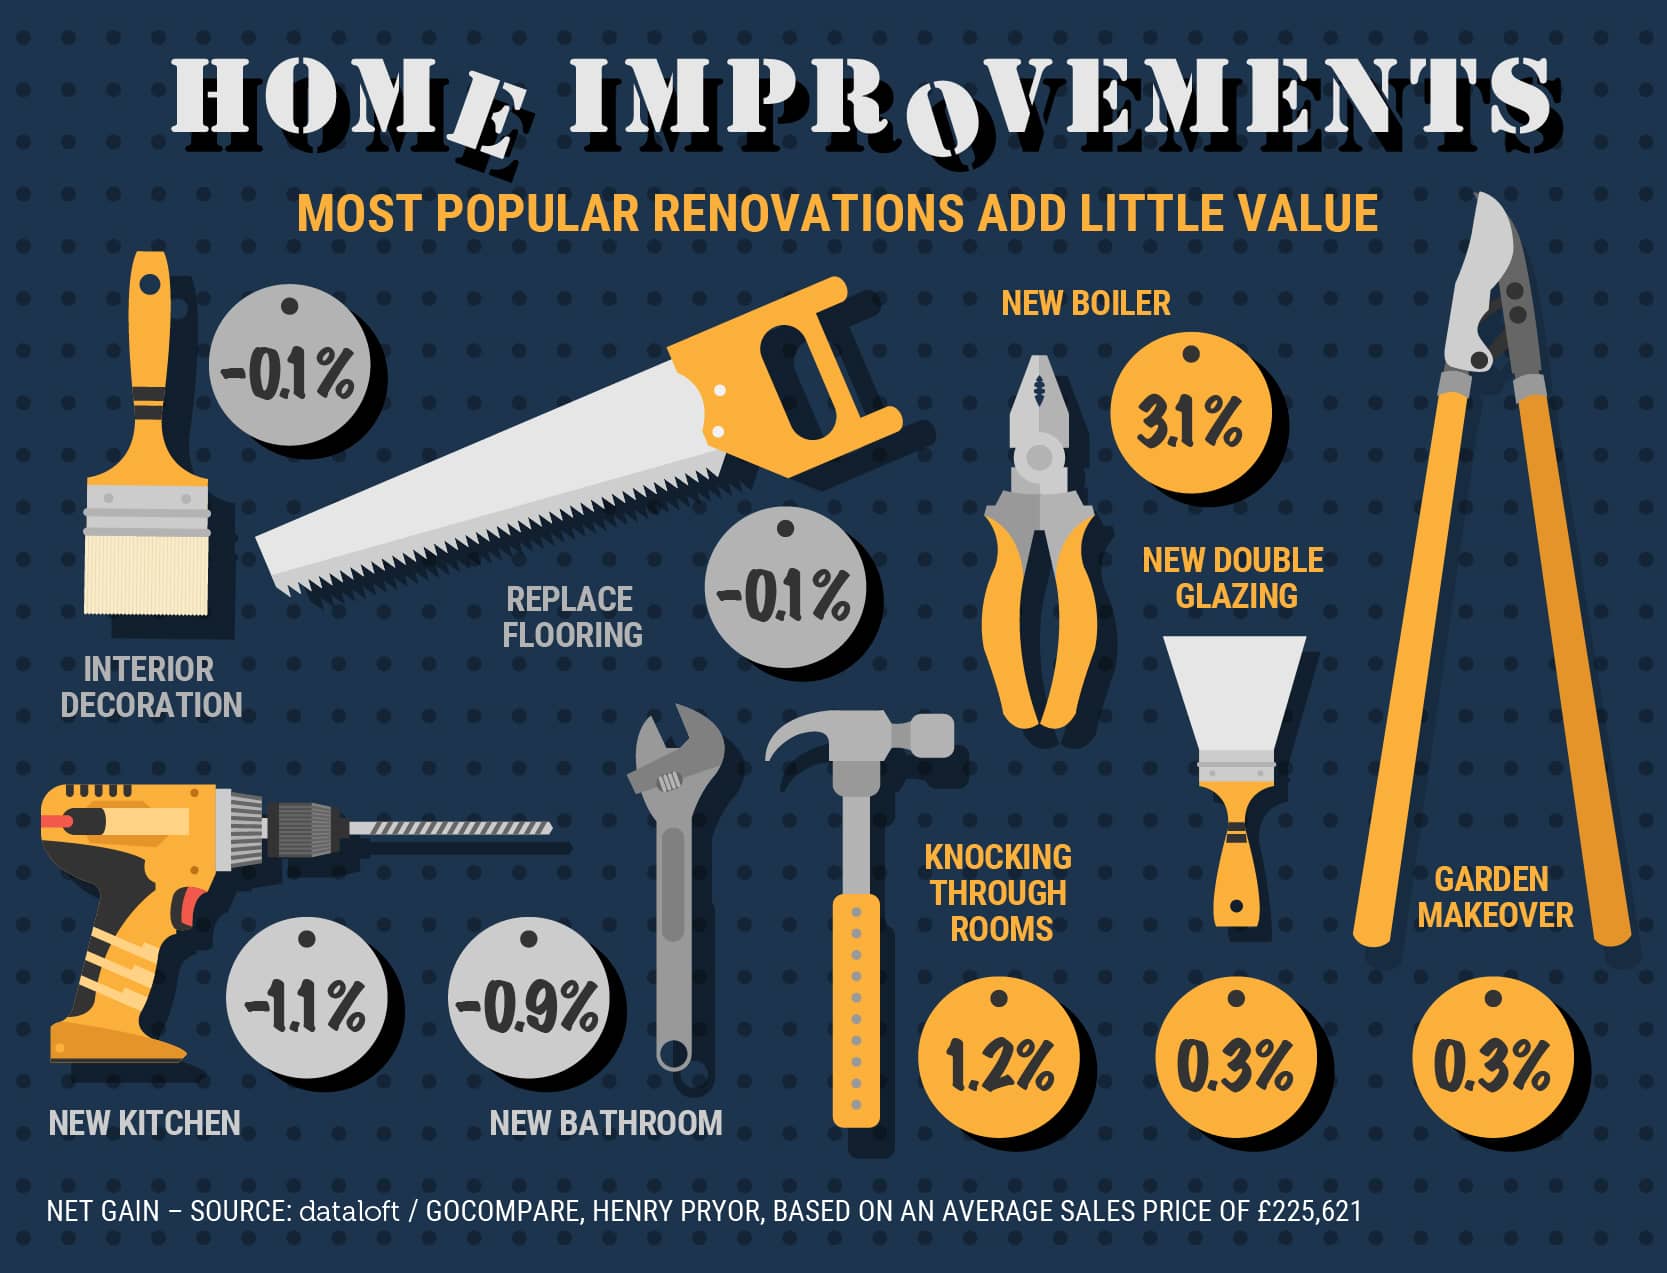 home improvements can cost more than the value they add